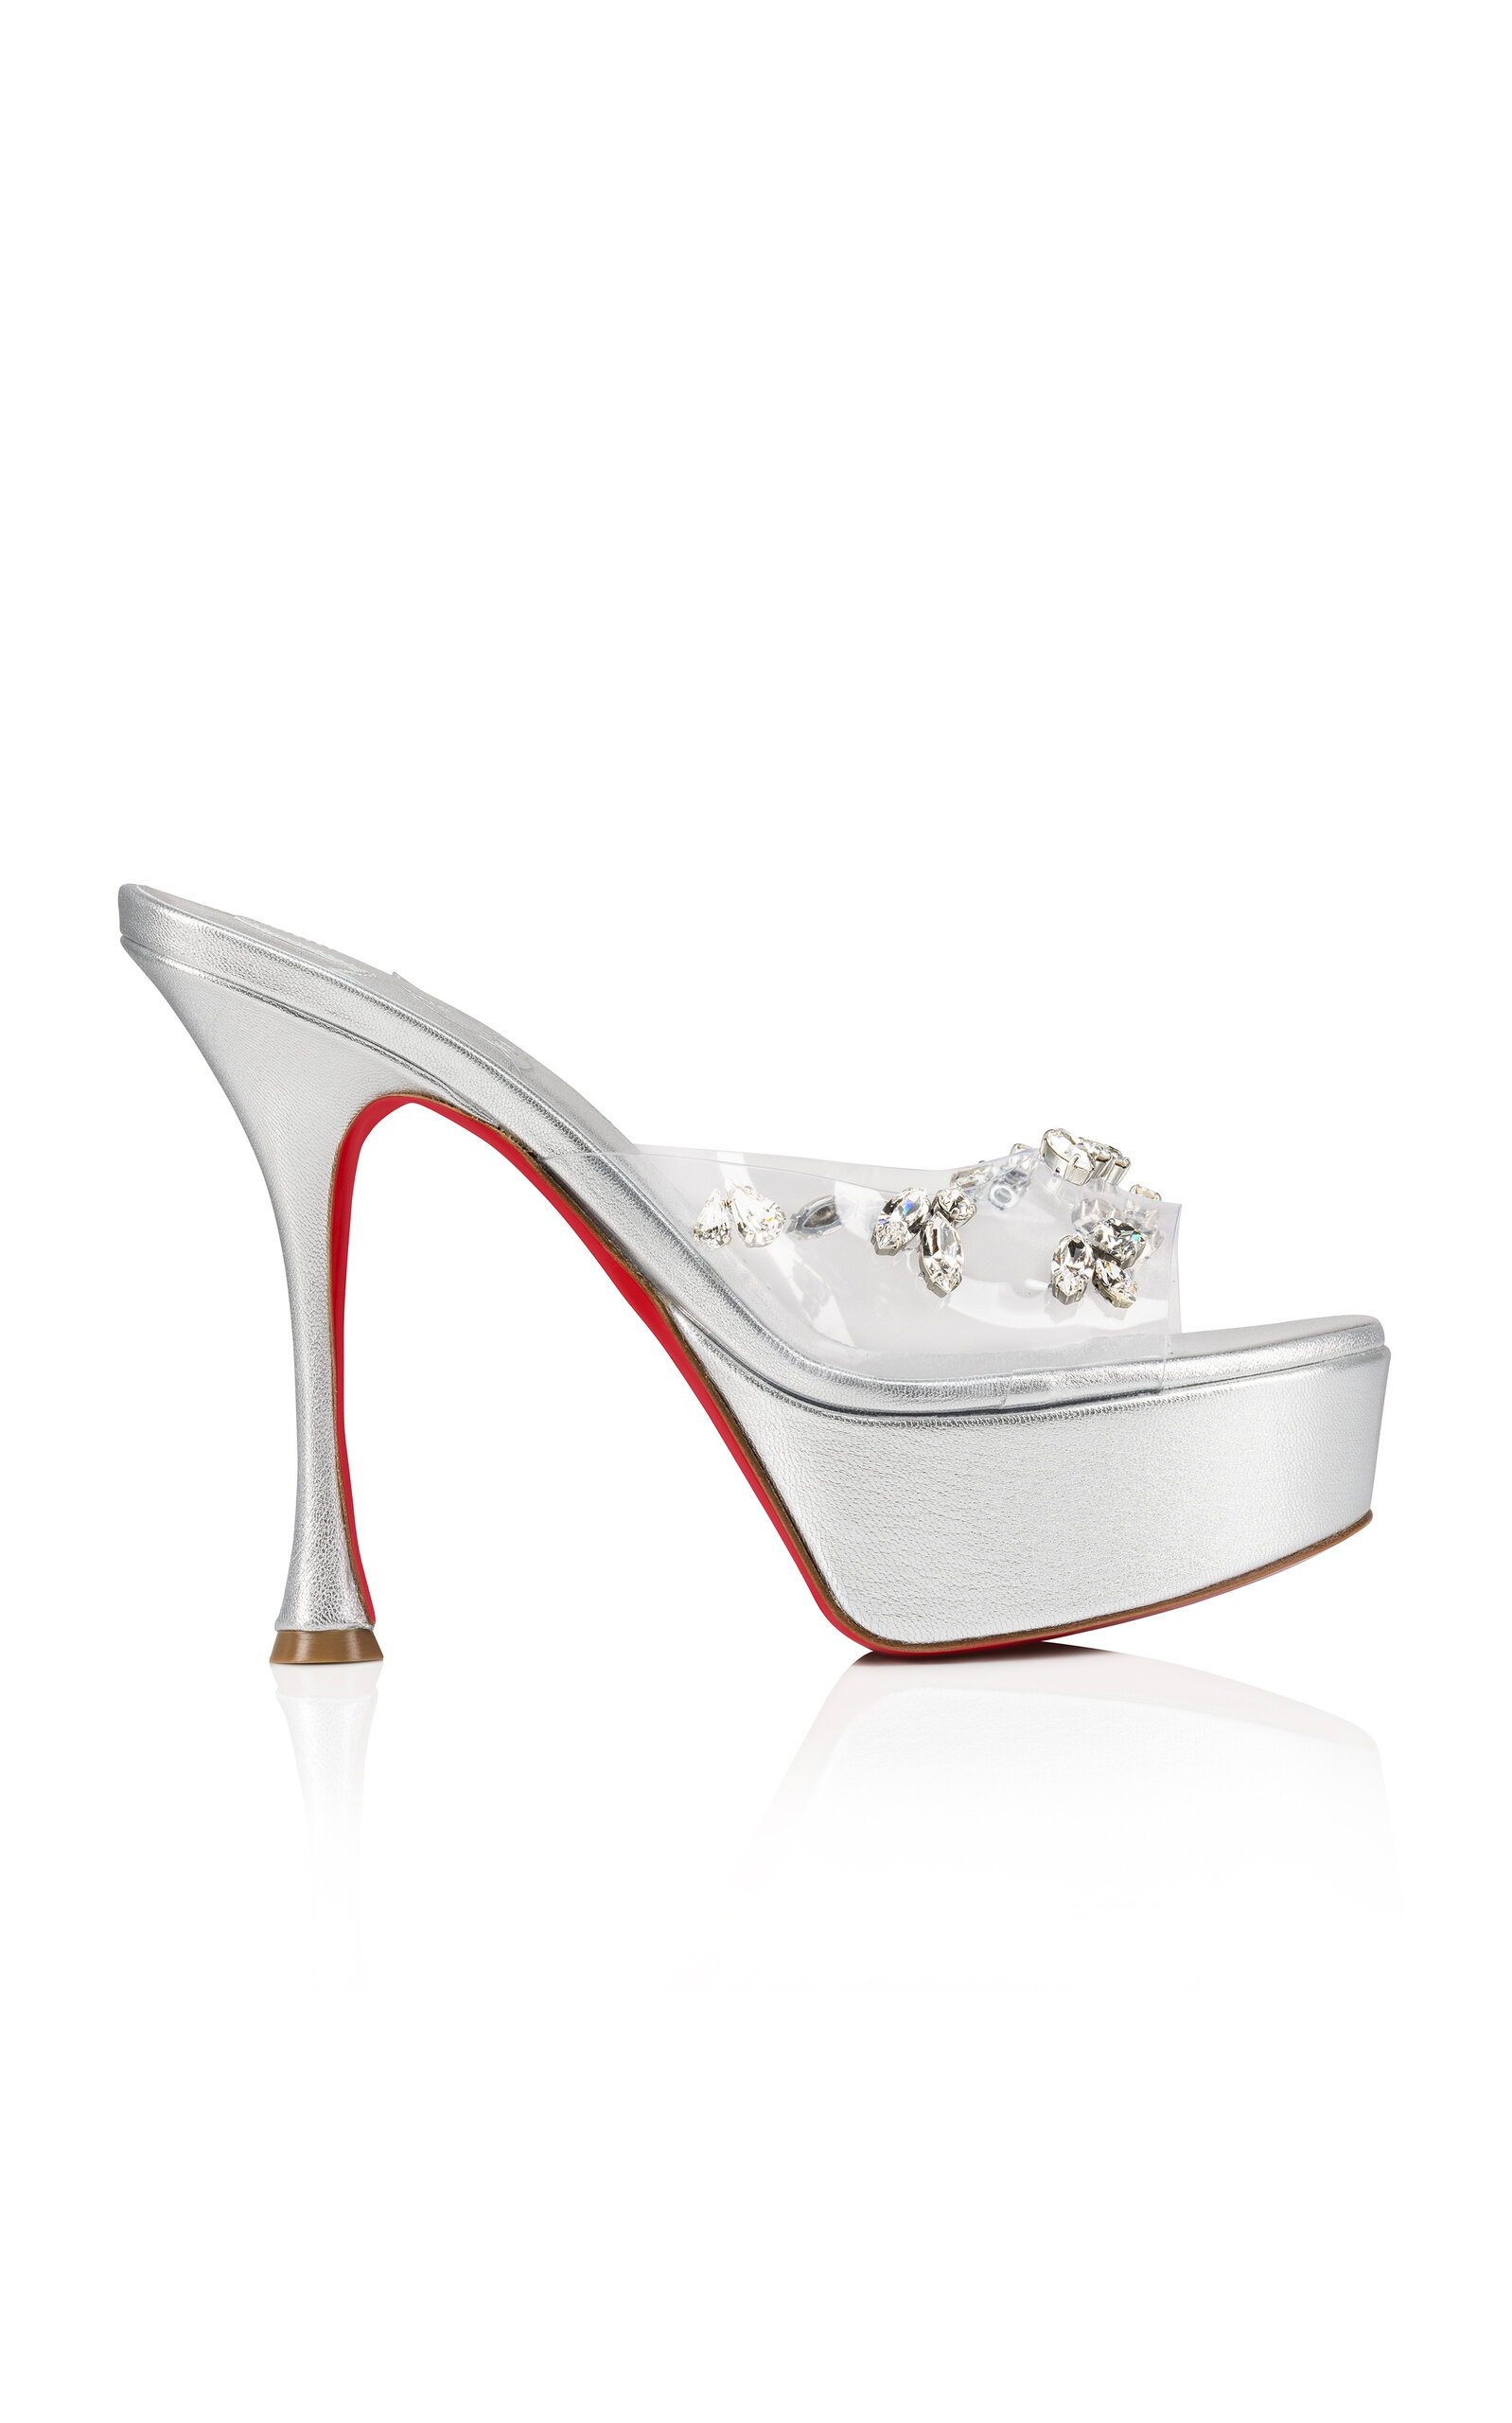 Christian Louboutin Degraqueen Alta 130mm Leather Pvc Sandals In Silver